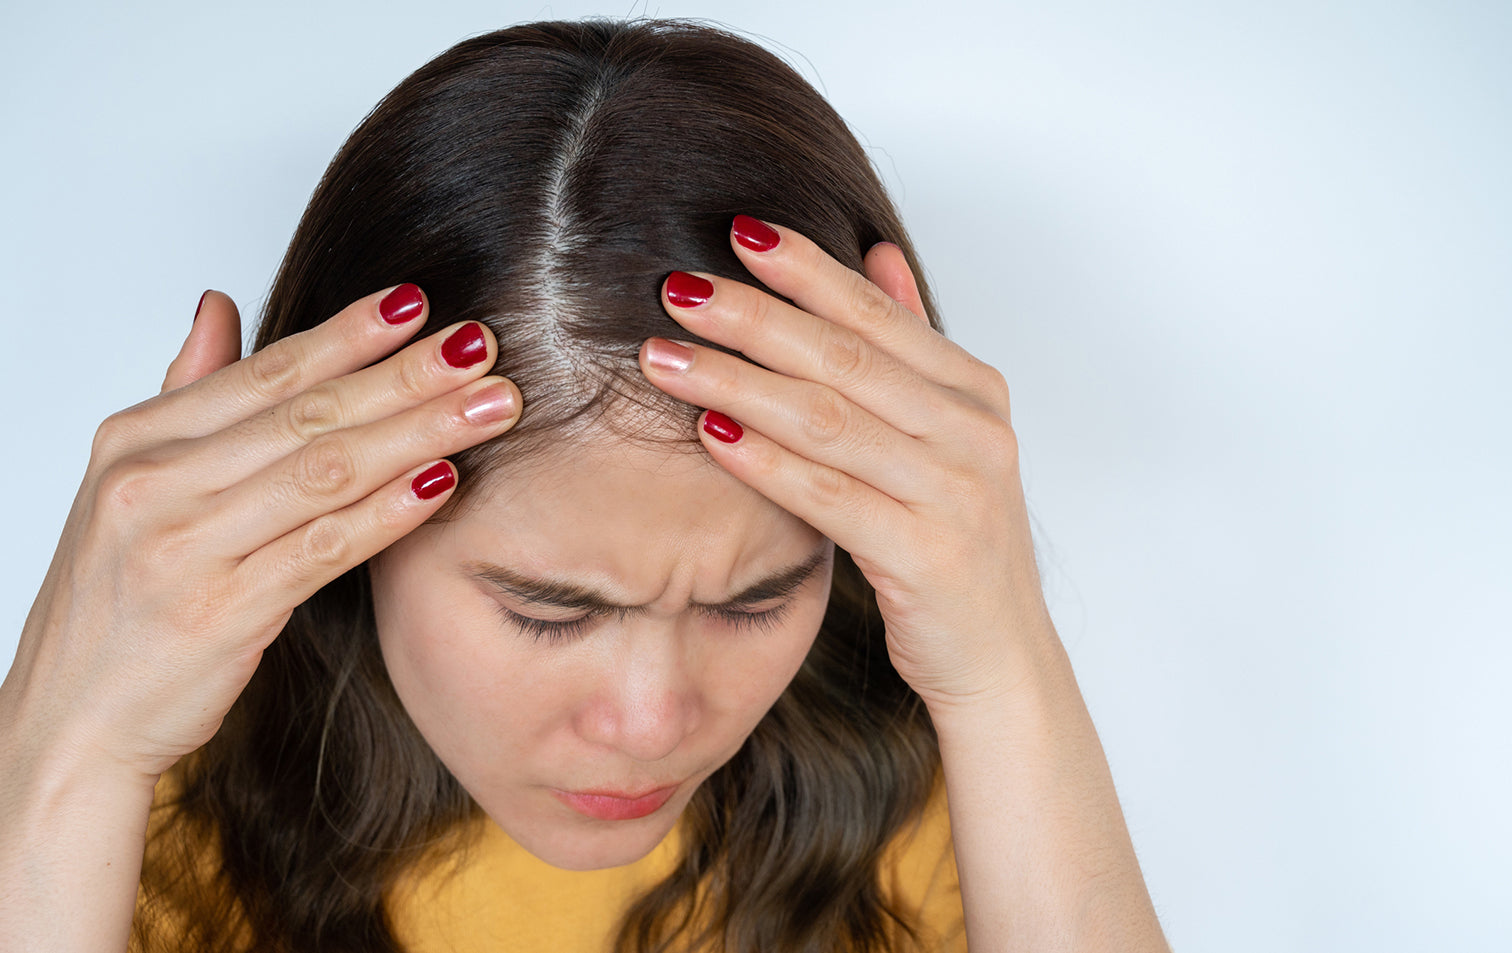 Thinning Hair and Hair Loss - Could It Be Female Pattern Hair Loss?